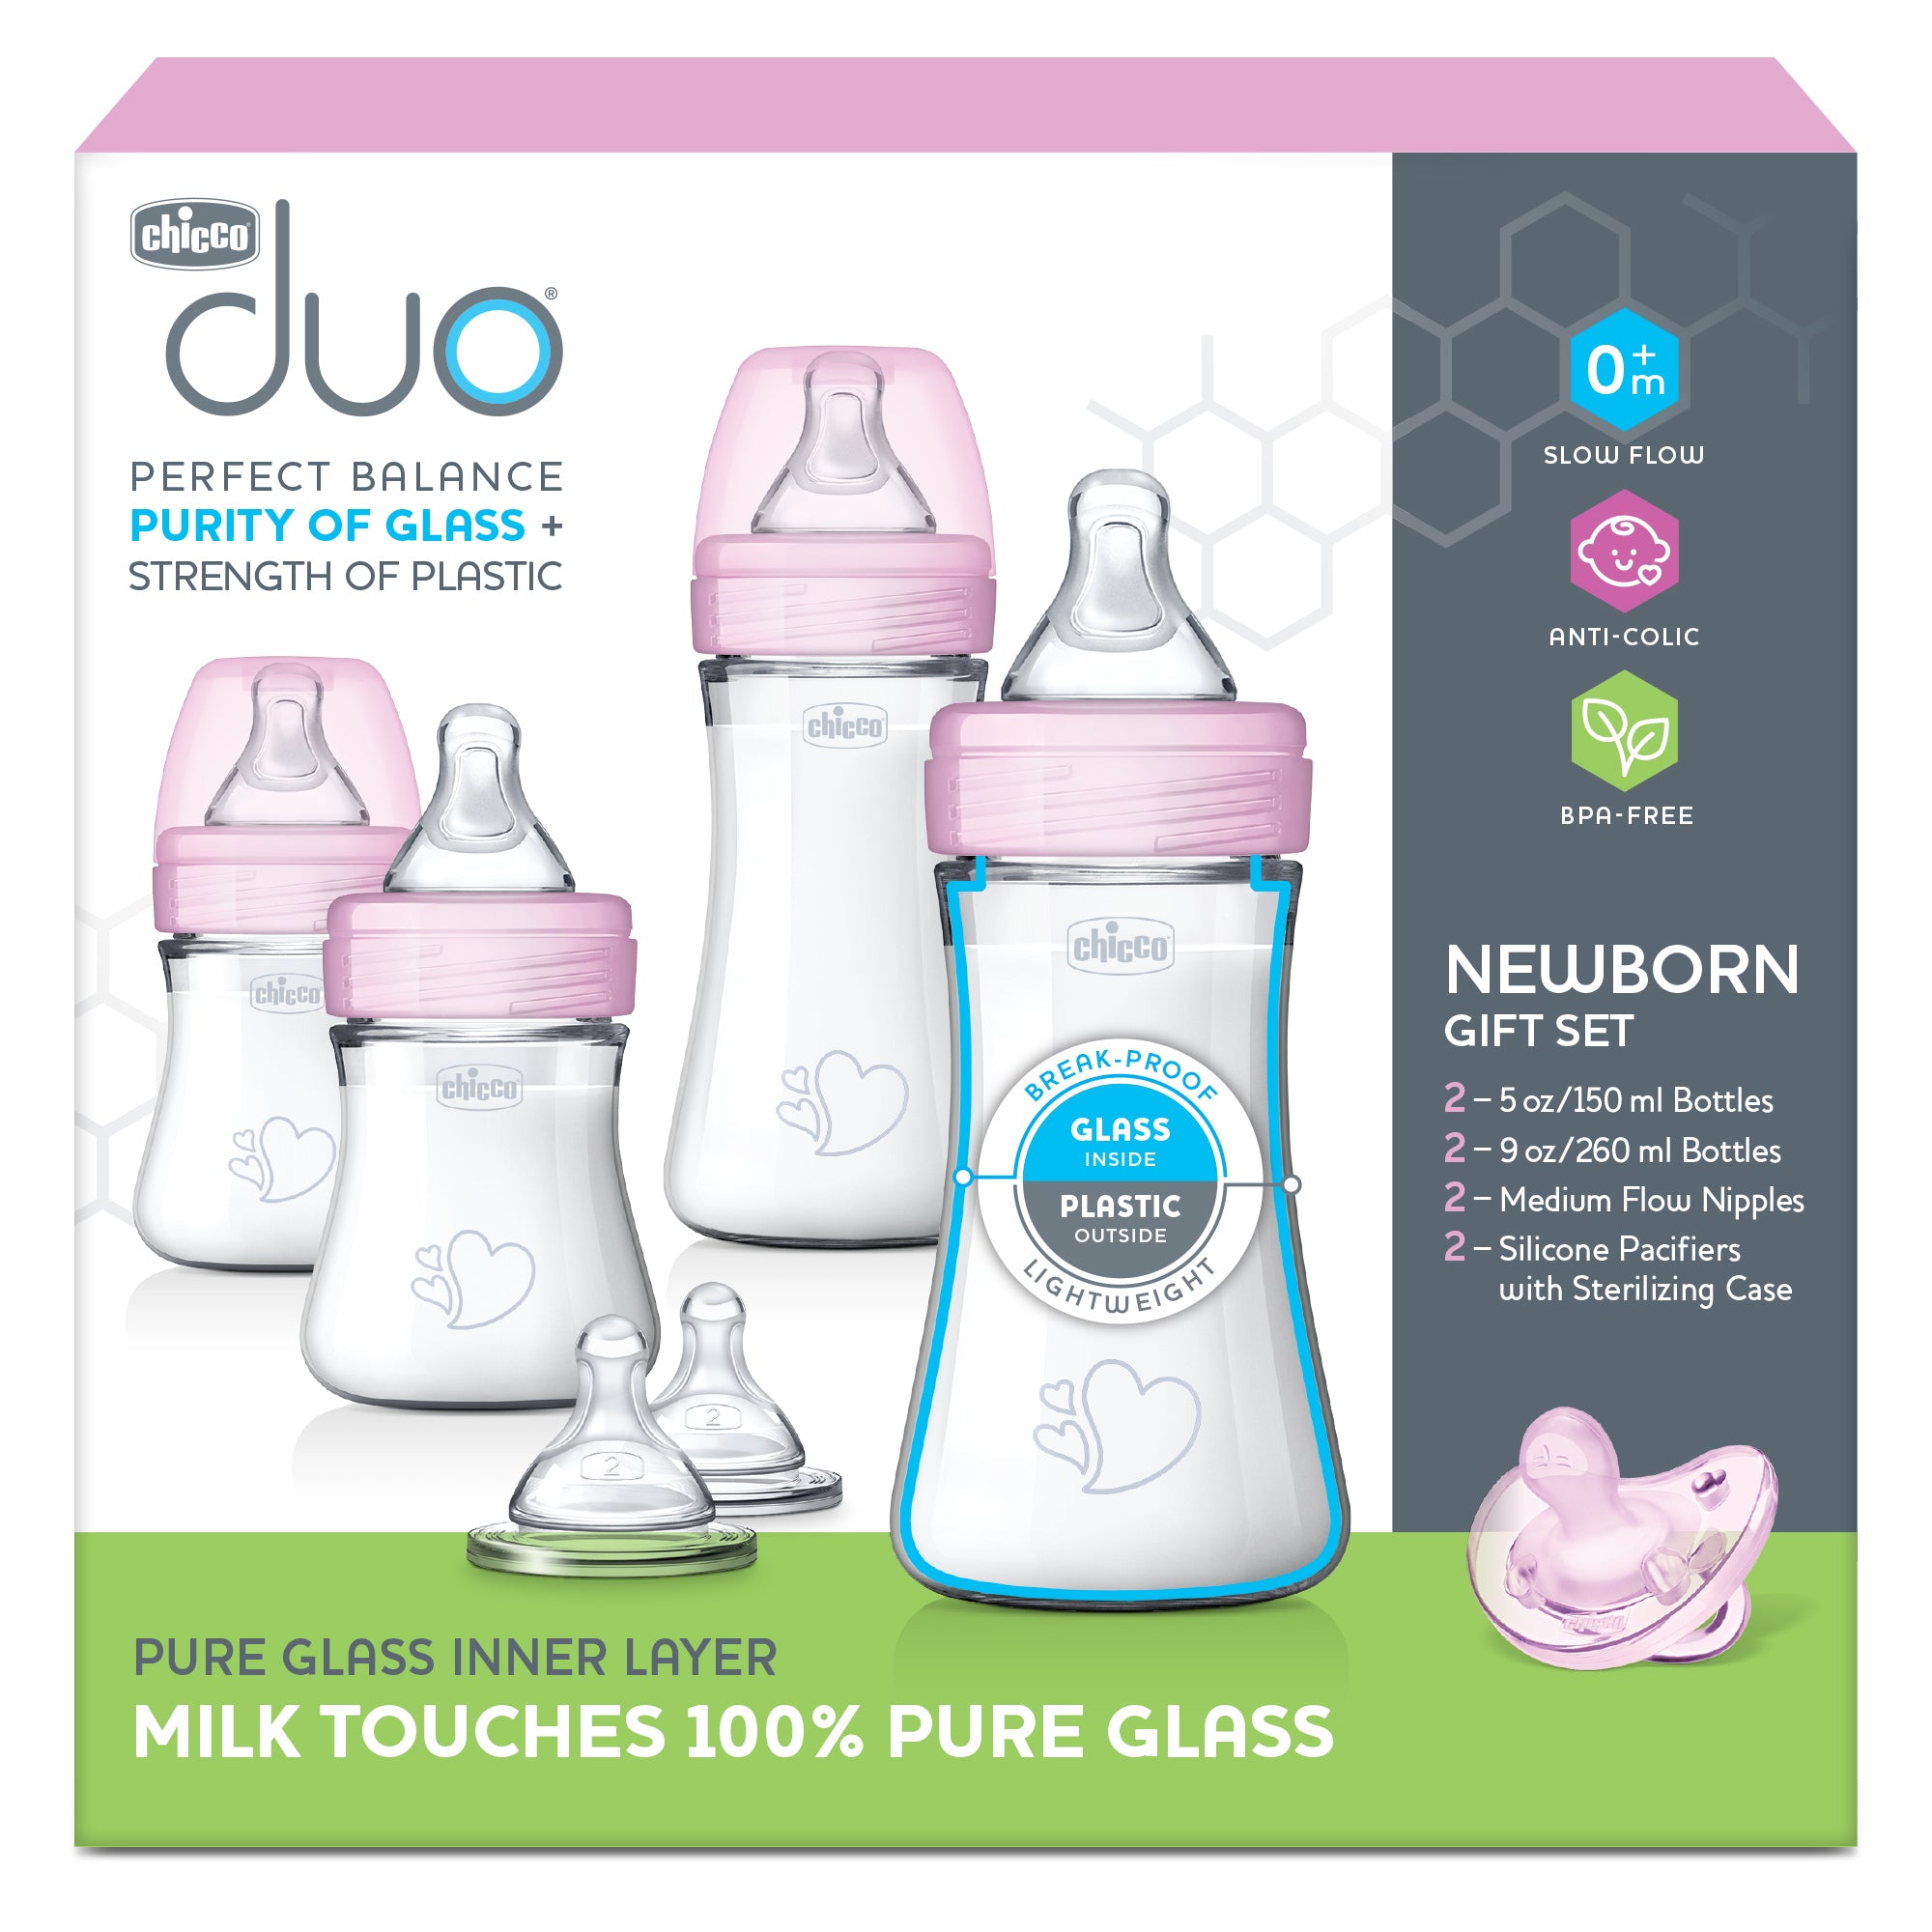 Chicco Duo Newborn Hybrid Baby Bottle Starter Gift Set with Invinci-Glass Inside/Plastic Outside